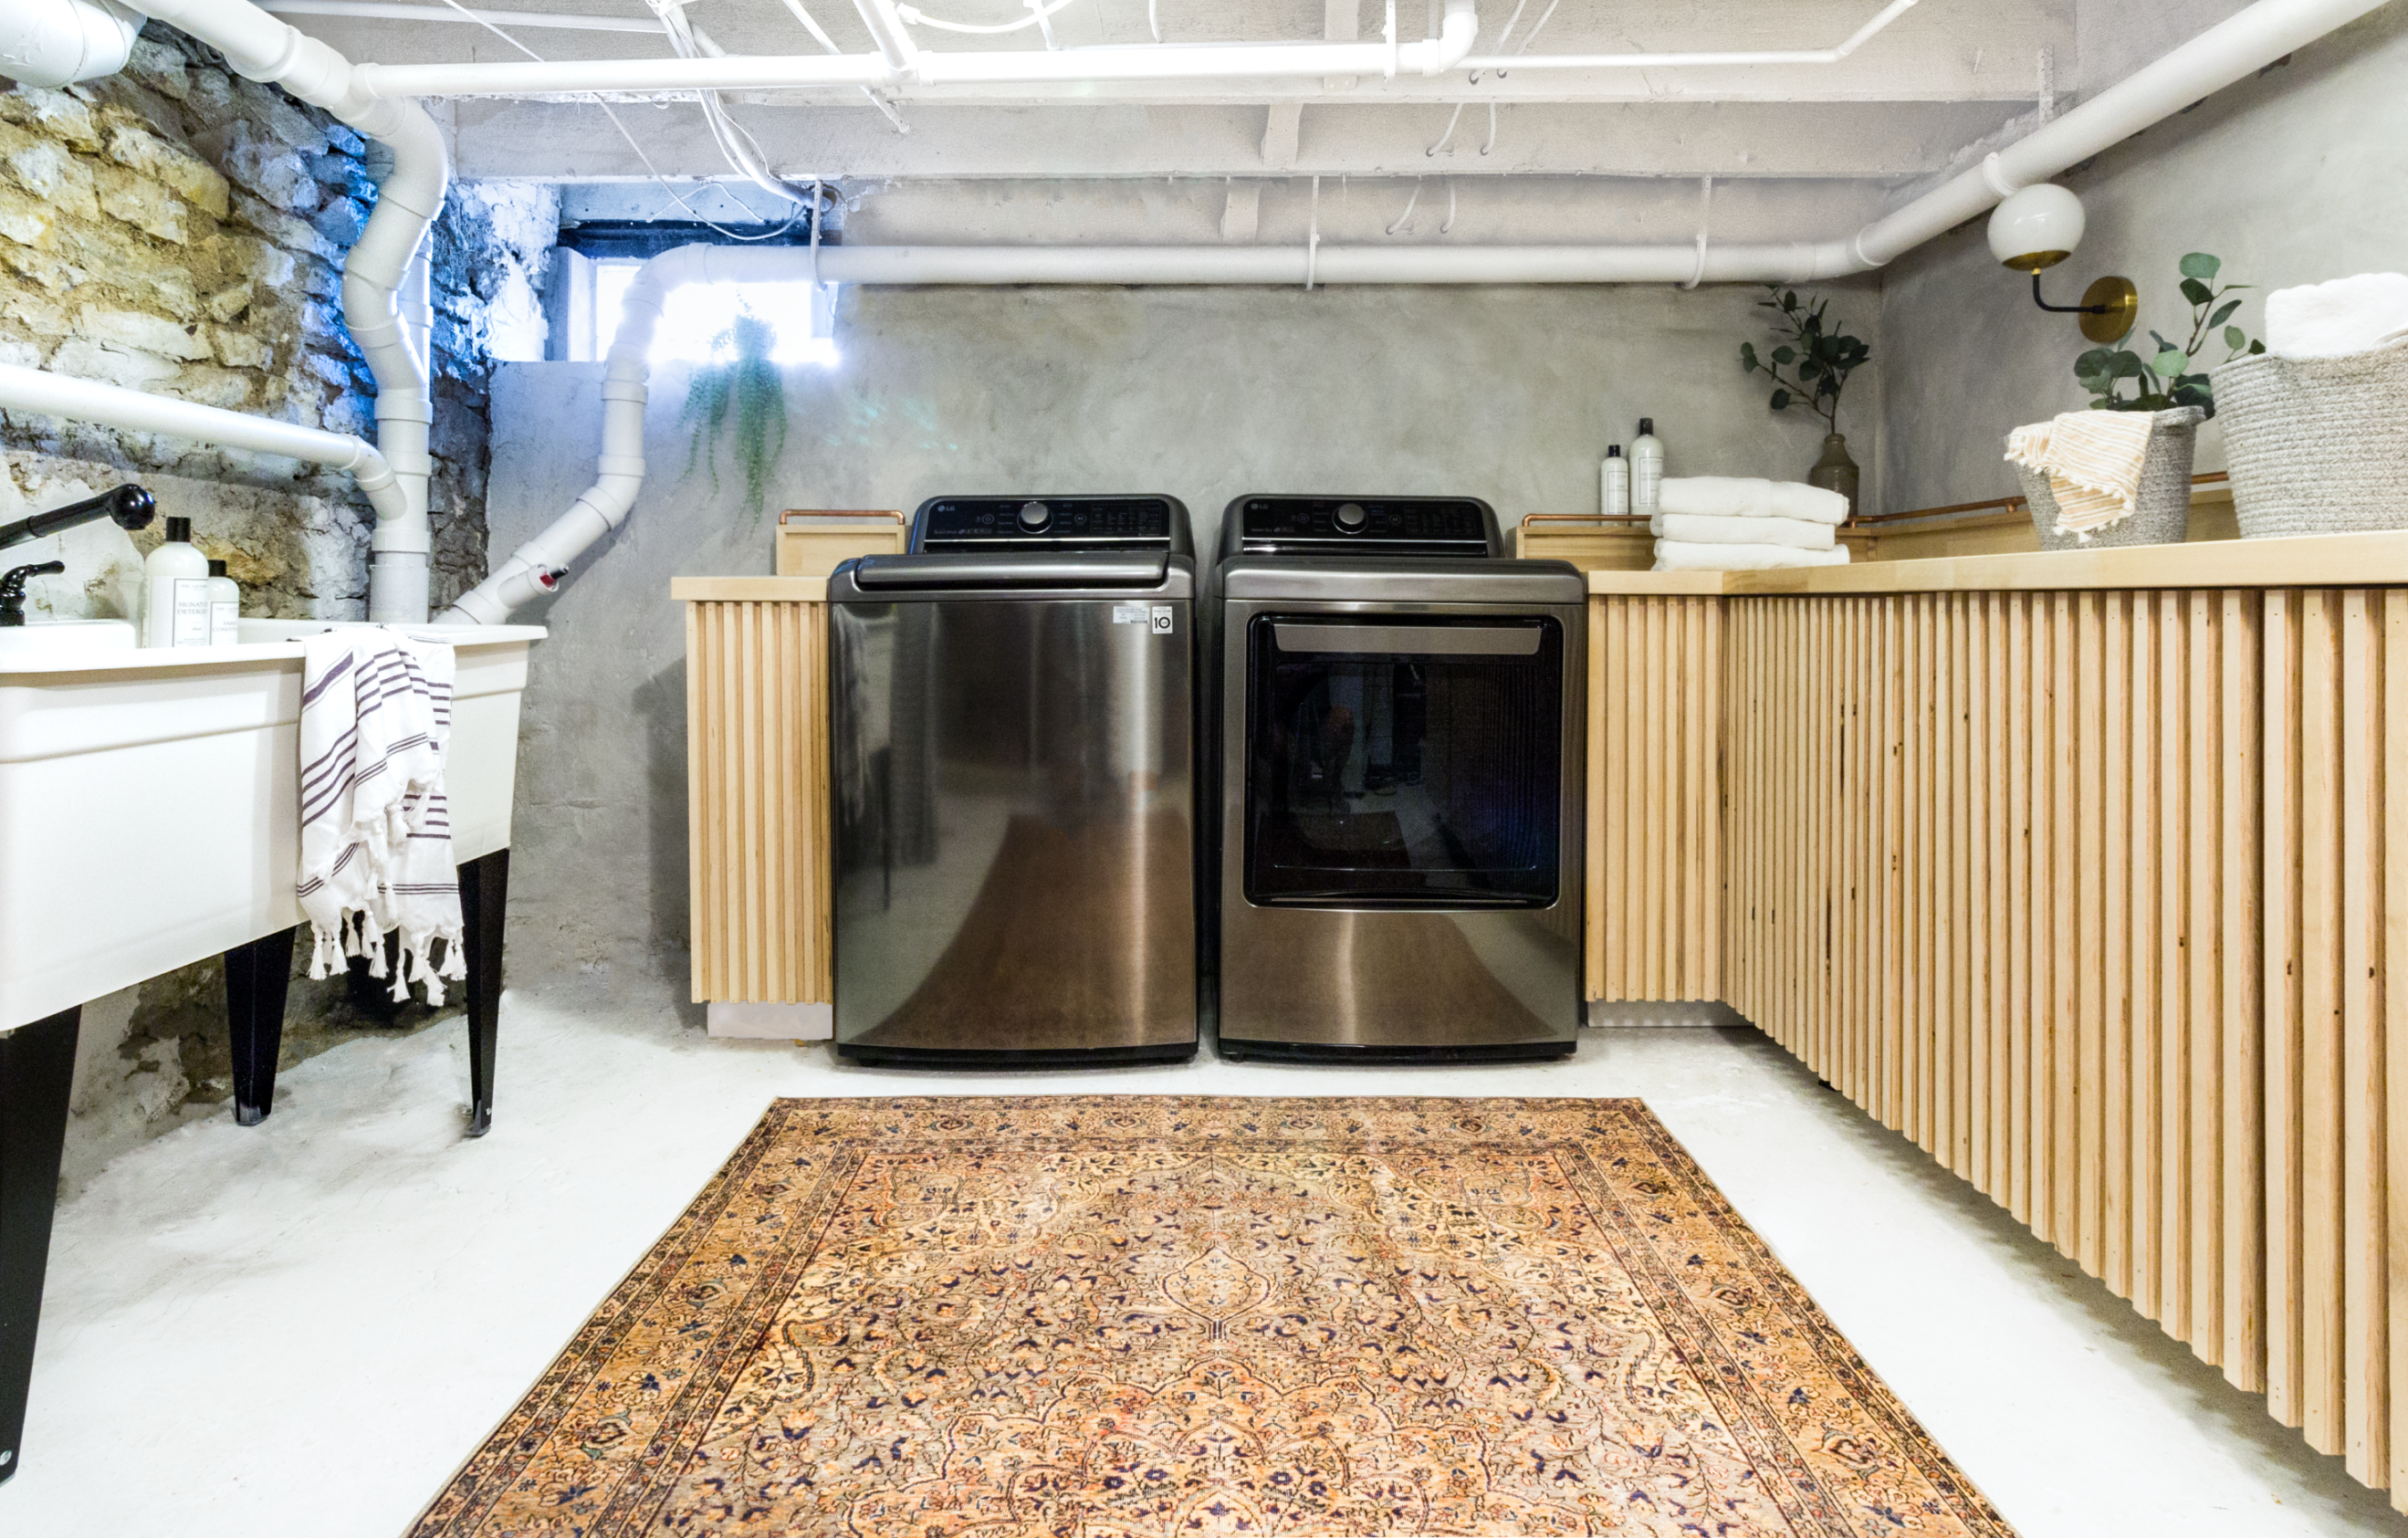 REVEAL: #pearlgoesmodern Basement Laundry Room  Beginning in the